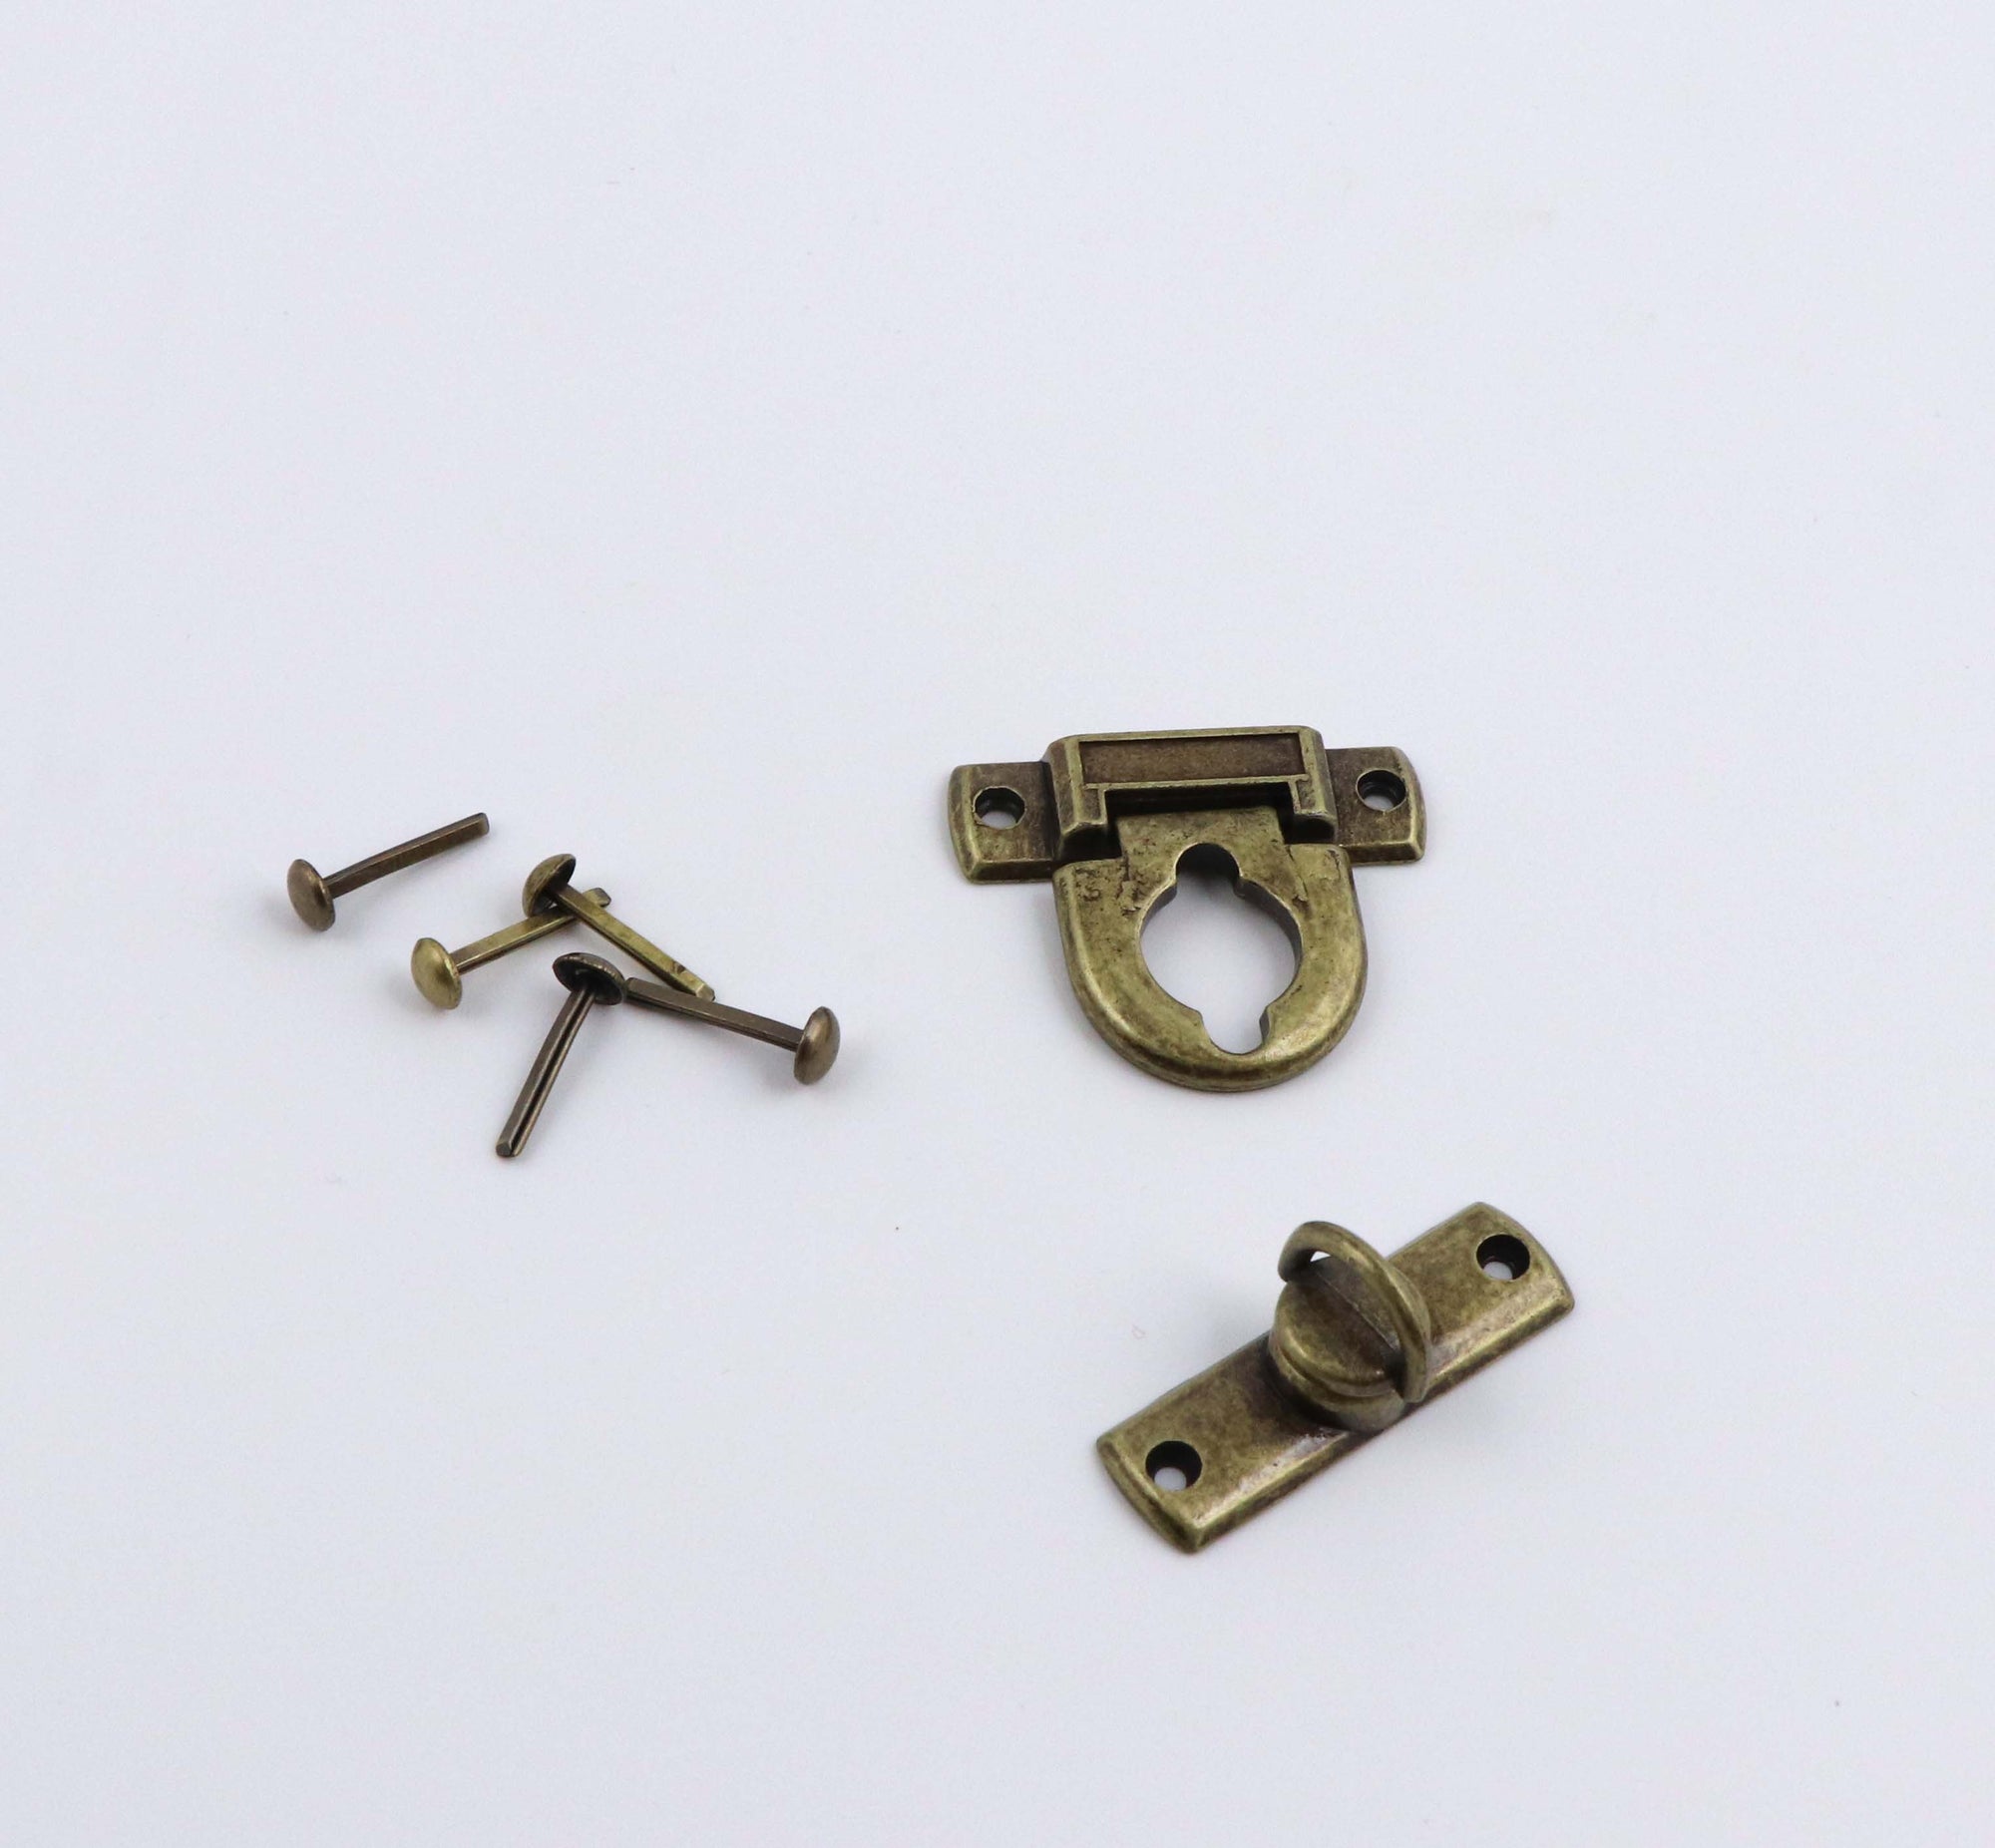 Brass box clasp, 1 1/4 metal clasp for boxes with brads included